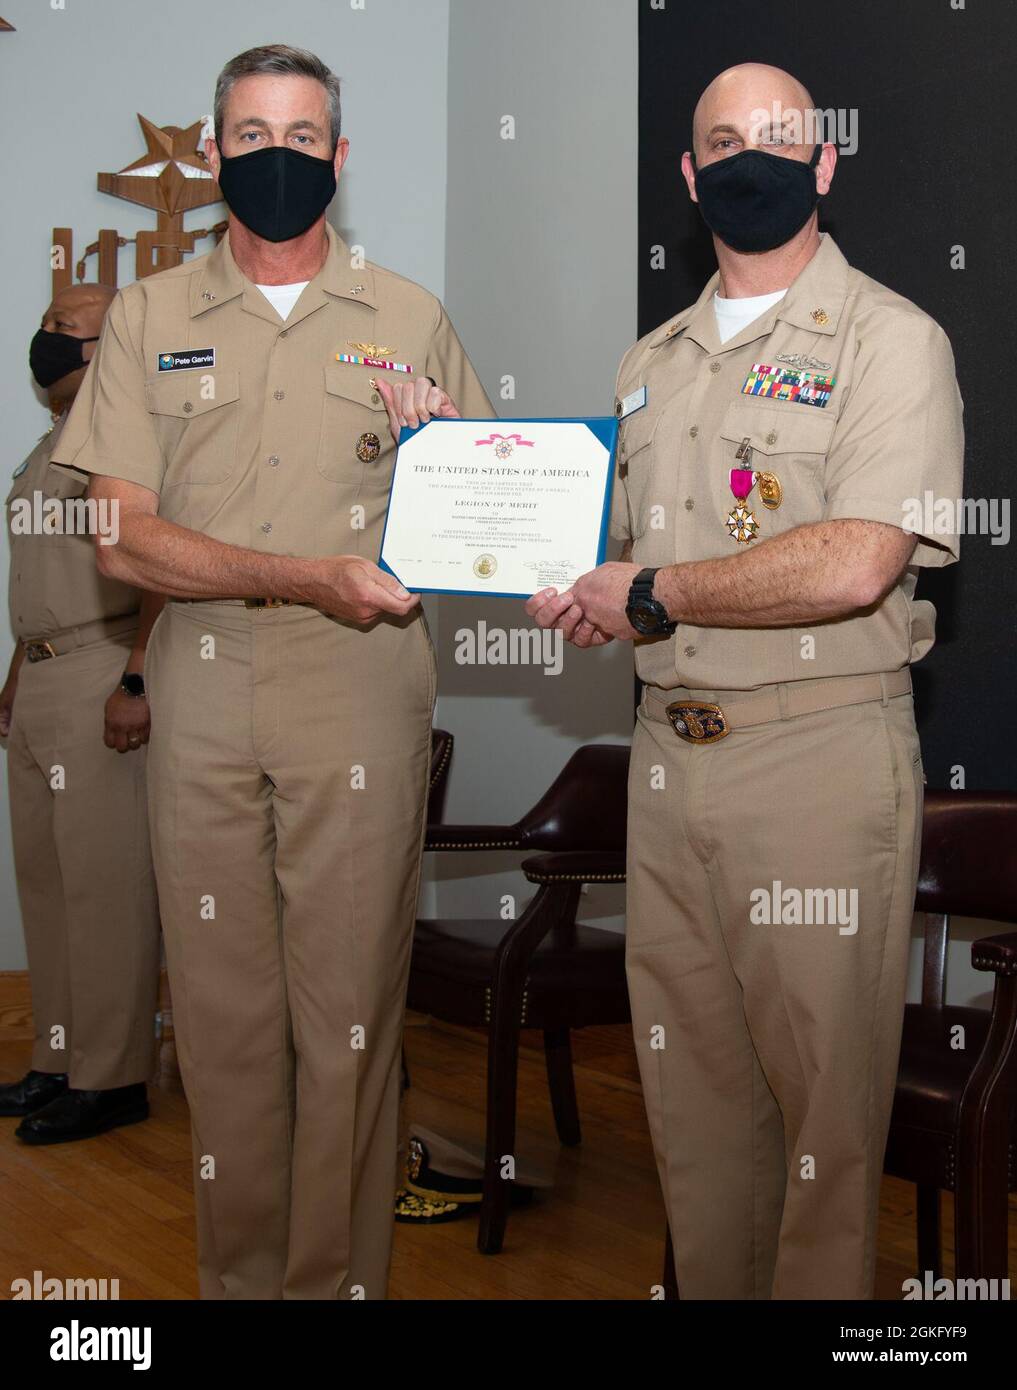 210412-N-EL867-0054 Newport, R.I. (April 12, 2021) Rear Adm. Pete Garvin, commander, Naval Education and Training Command, left, awards Command Master Chief Jason Avin, director, Senior Enlisted Academy (SEA), the Legion of Merit during the SEA change of charge ceremony, April 12. The ceremony also celebrated the expansion of Tomich Hall, the main classroom dedicated to senior enlisted leaders to improve management, leadership, national security and physical fitness. Tomich Hall will now be able to accommodate 218 students per class increasing the number of graduates from 1,232 to 2,398 a year Stock Photo